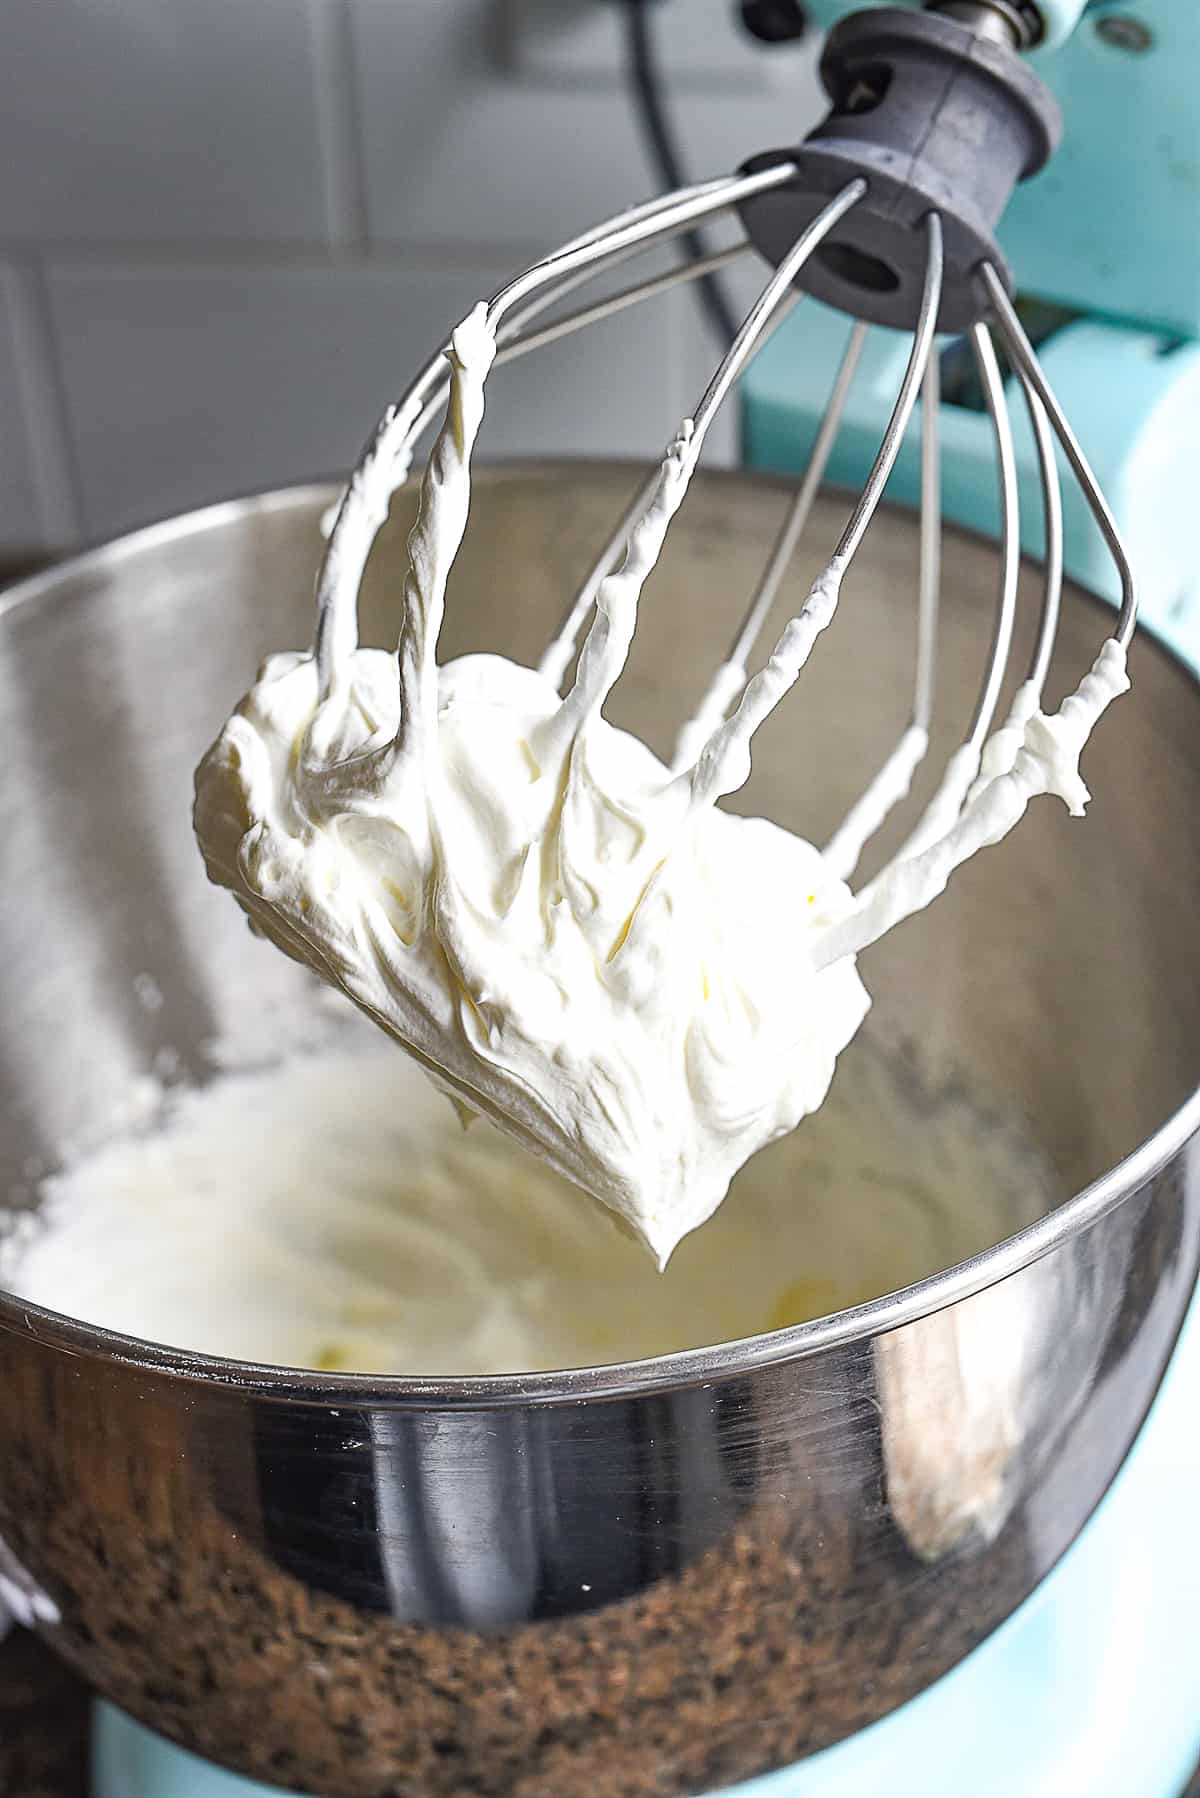 whipped crfeam on whisk